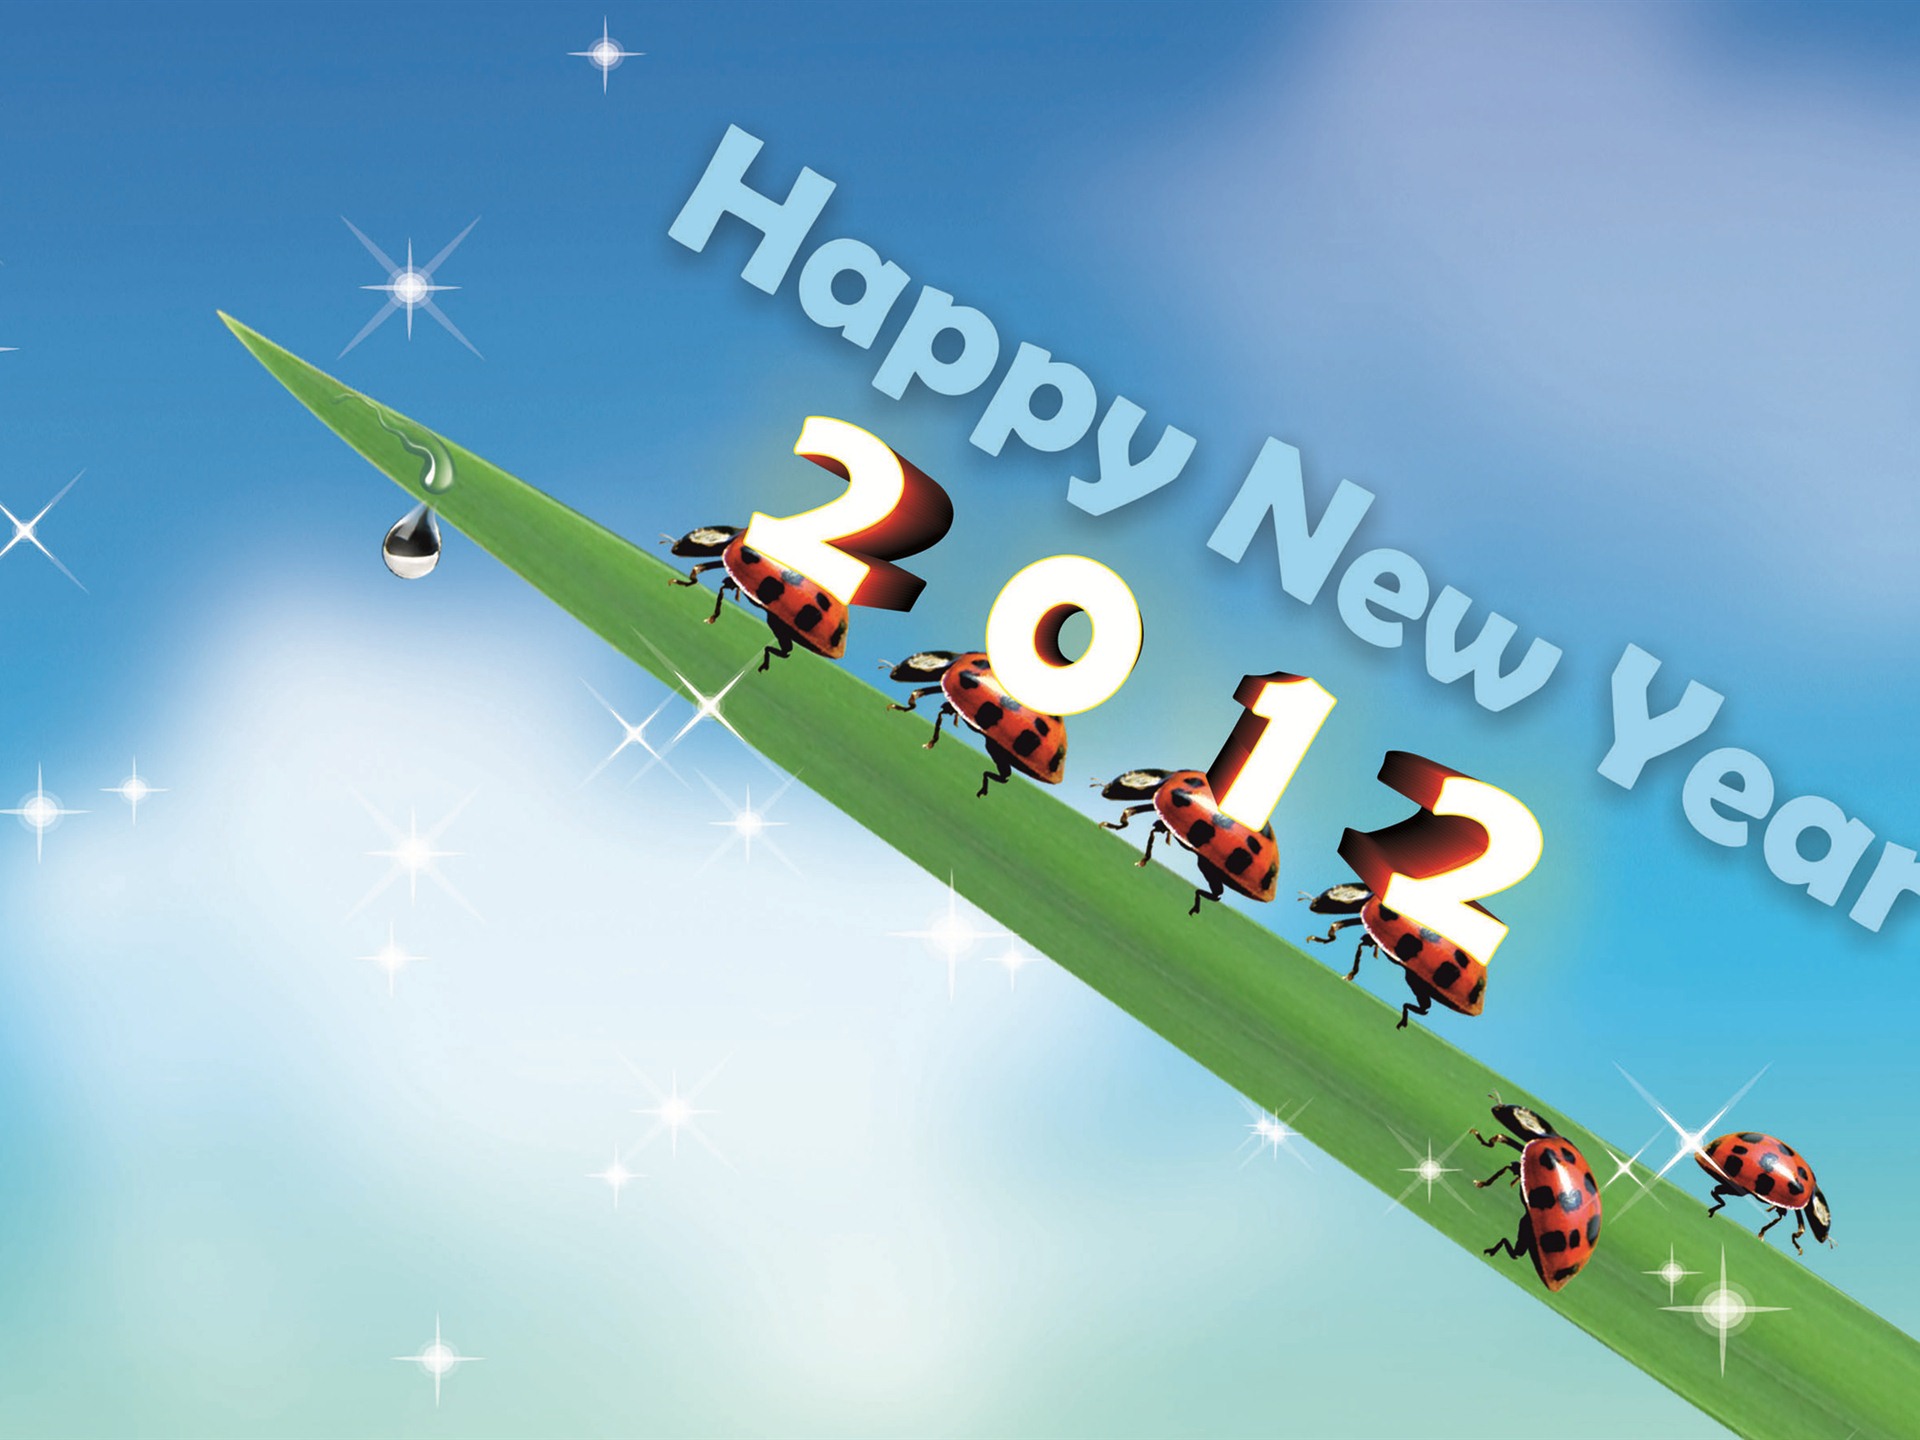 2012 New Year wallpapers (2) #8 - 1920x1440